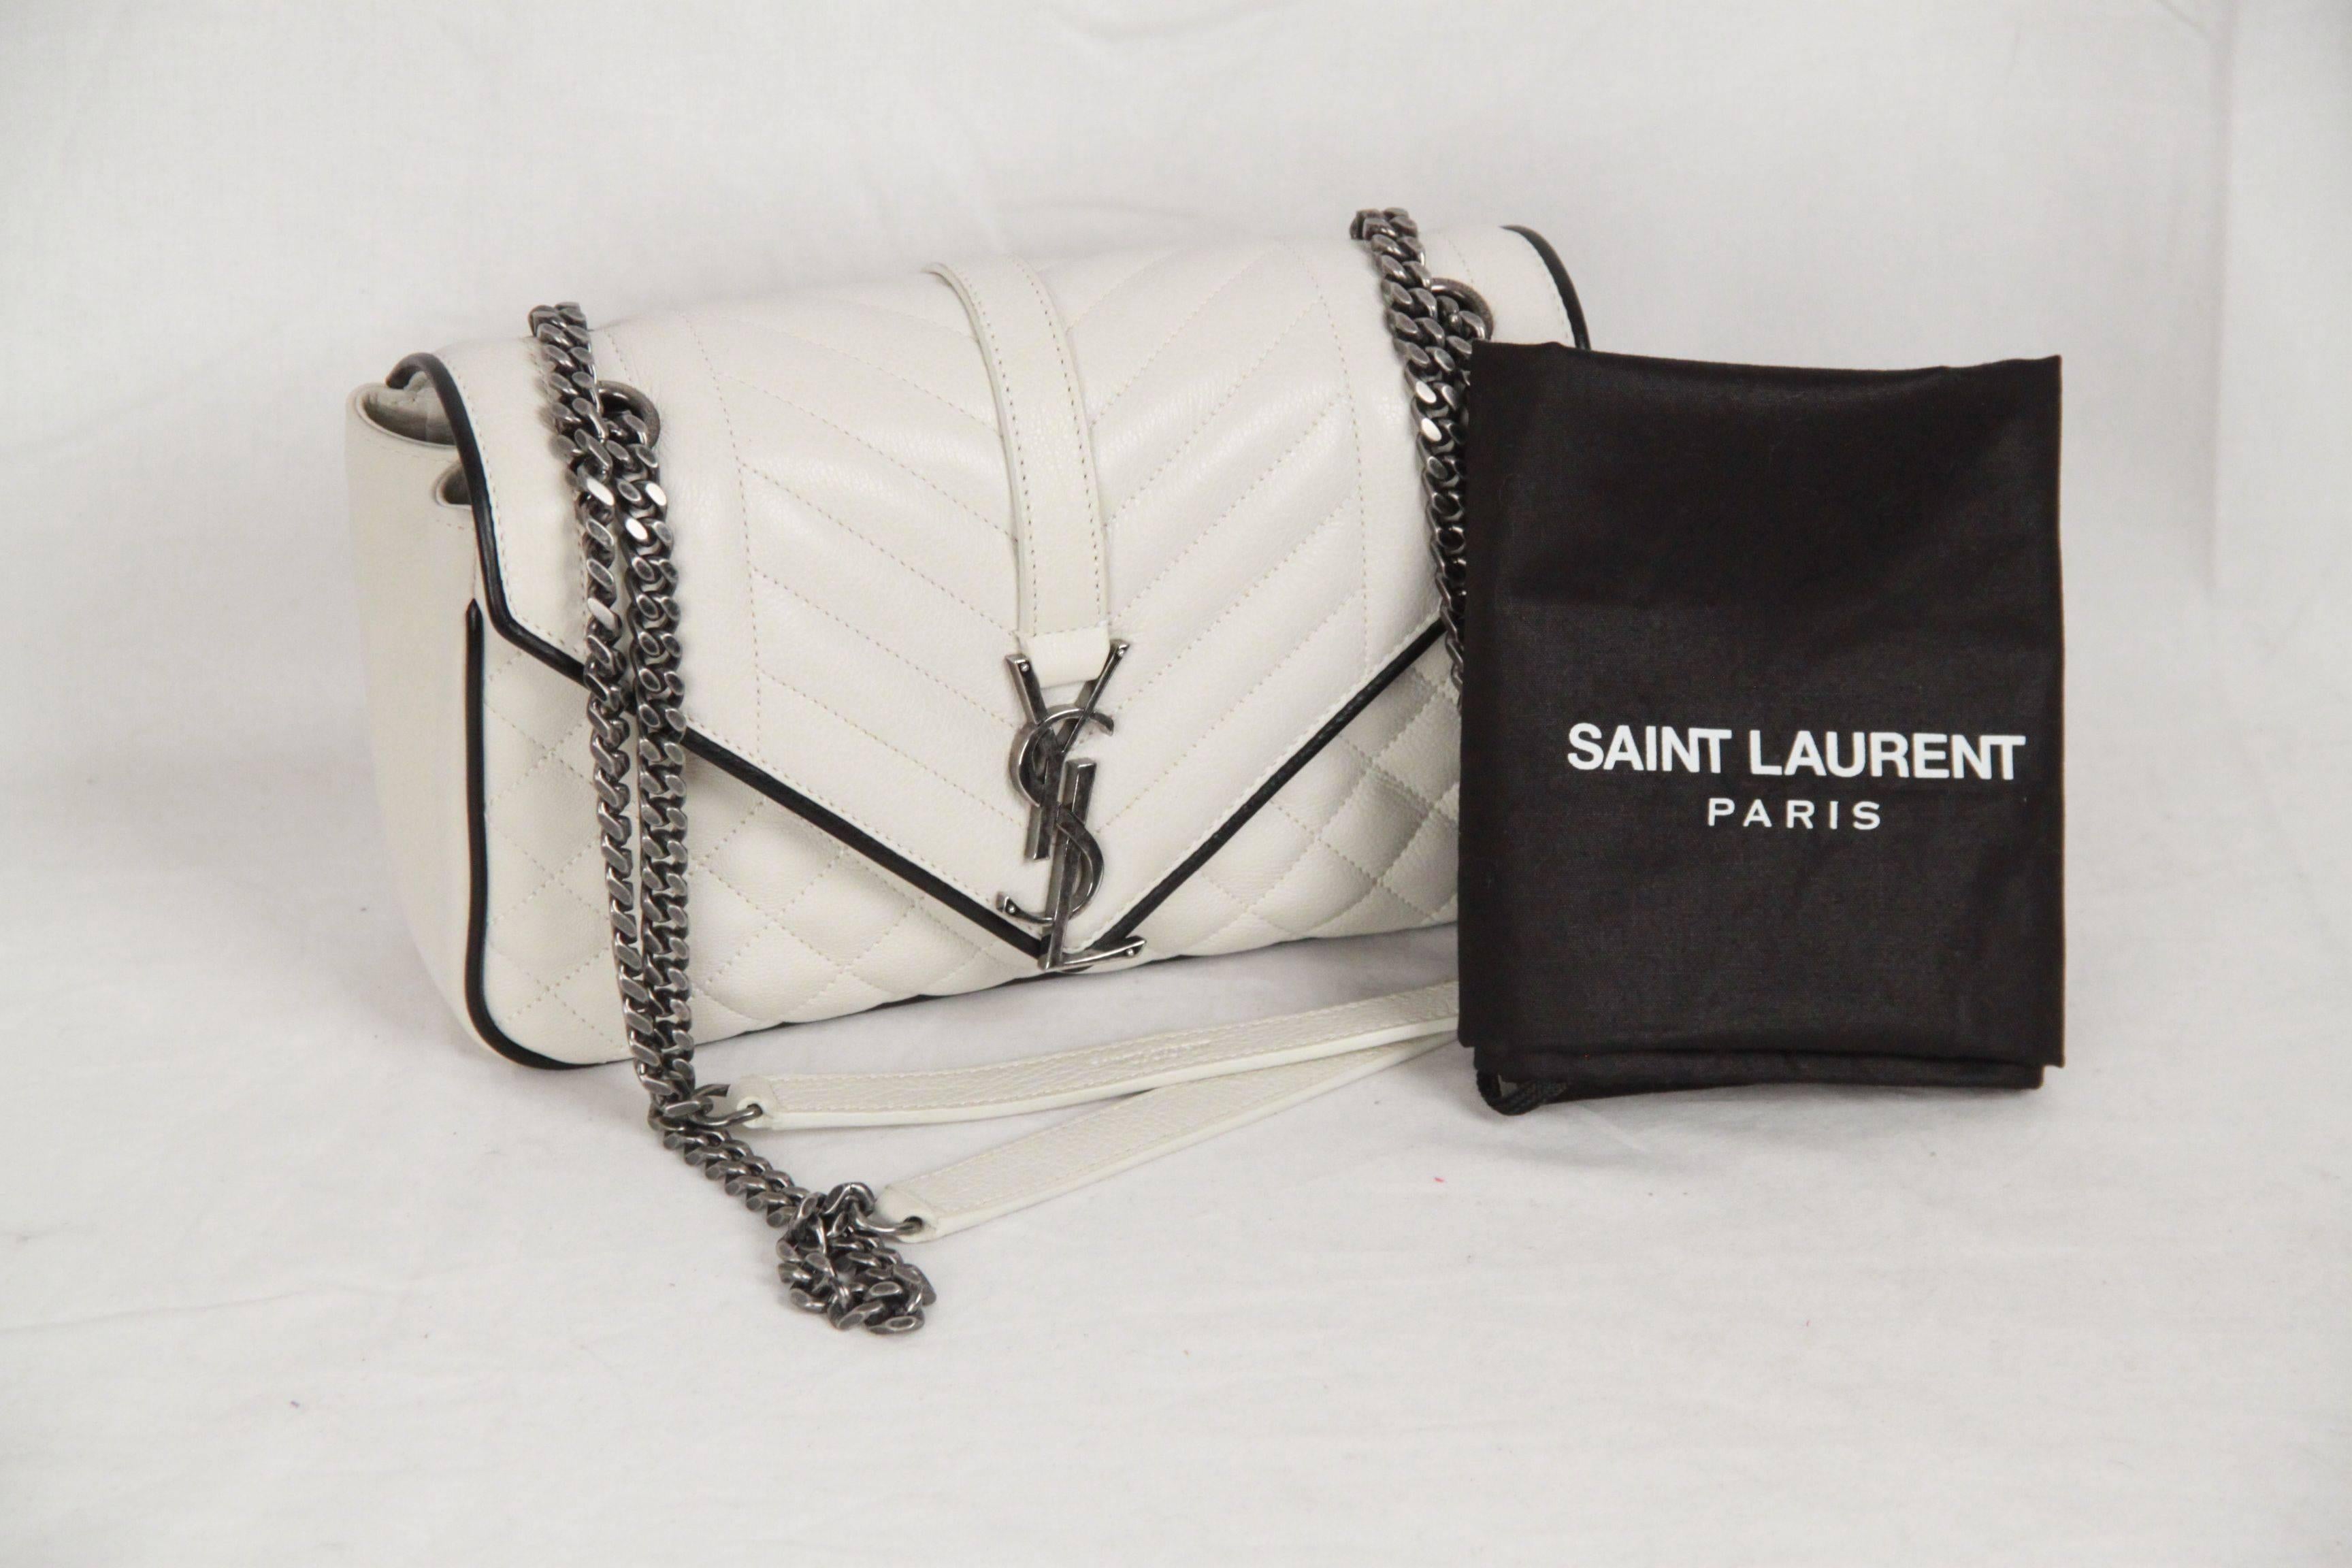 - Saint Laurent 'Tri-quilt' calfskin shoulder bag
- White color with black contrast edges
- Silver metal hardware
- Chain and leather shoulder strap can be doubled (11.8 inches - 30,5 cm drop, when doubled)
- Signature YSL monogram logo on the